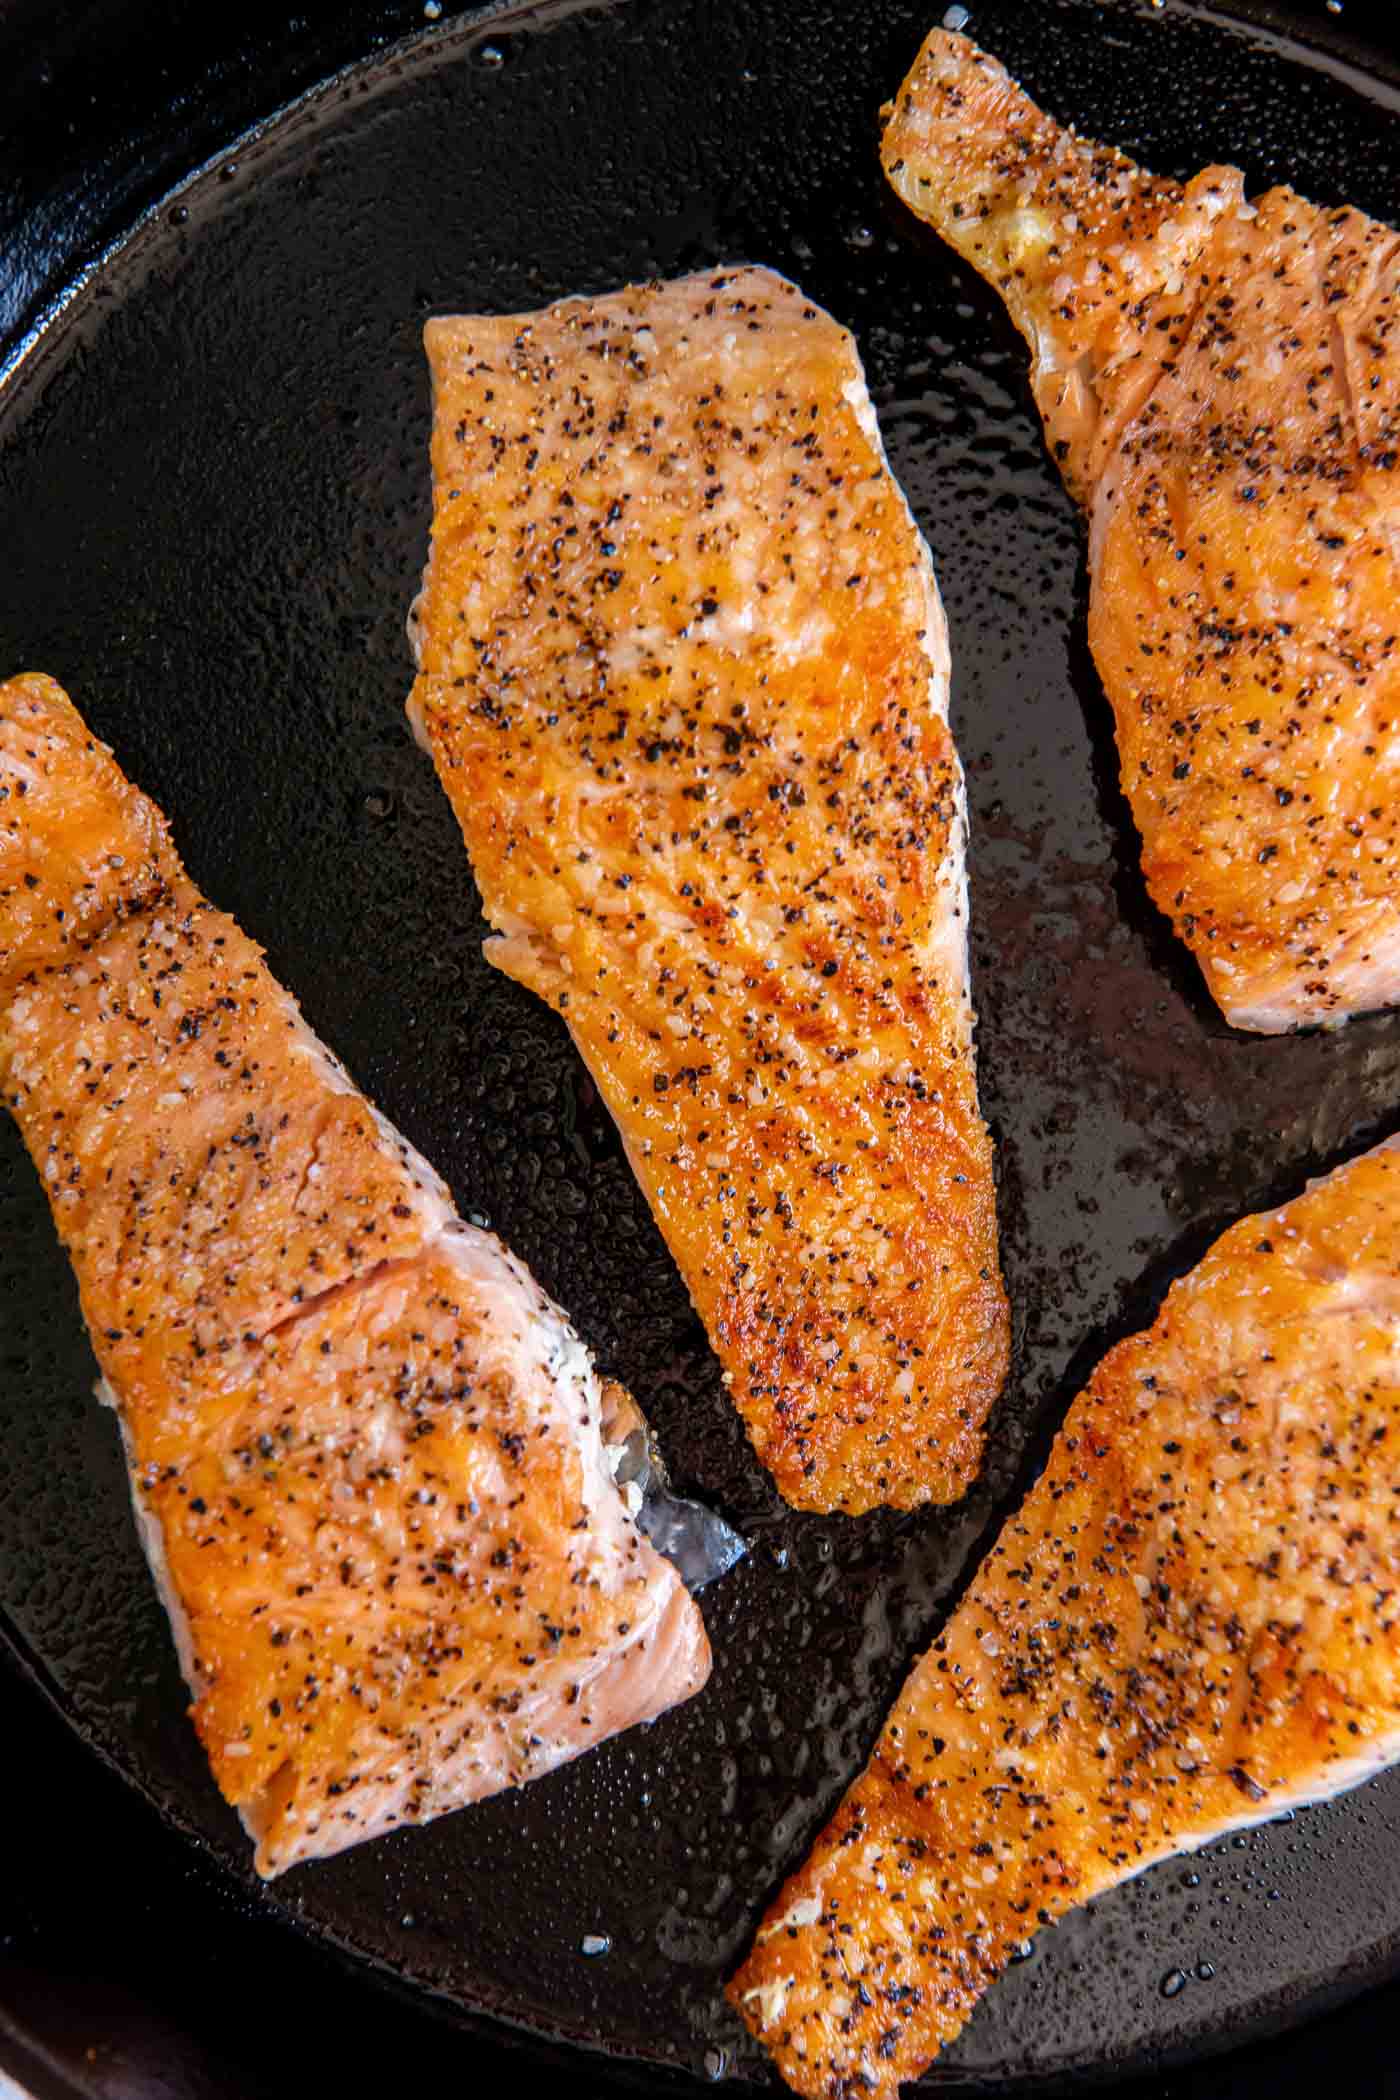 Four cooked salmon fillets in a cast iron skillet.